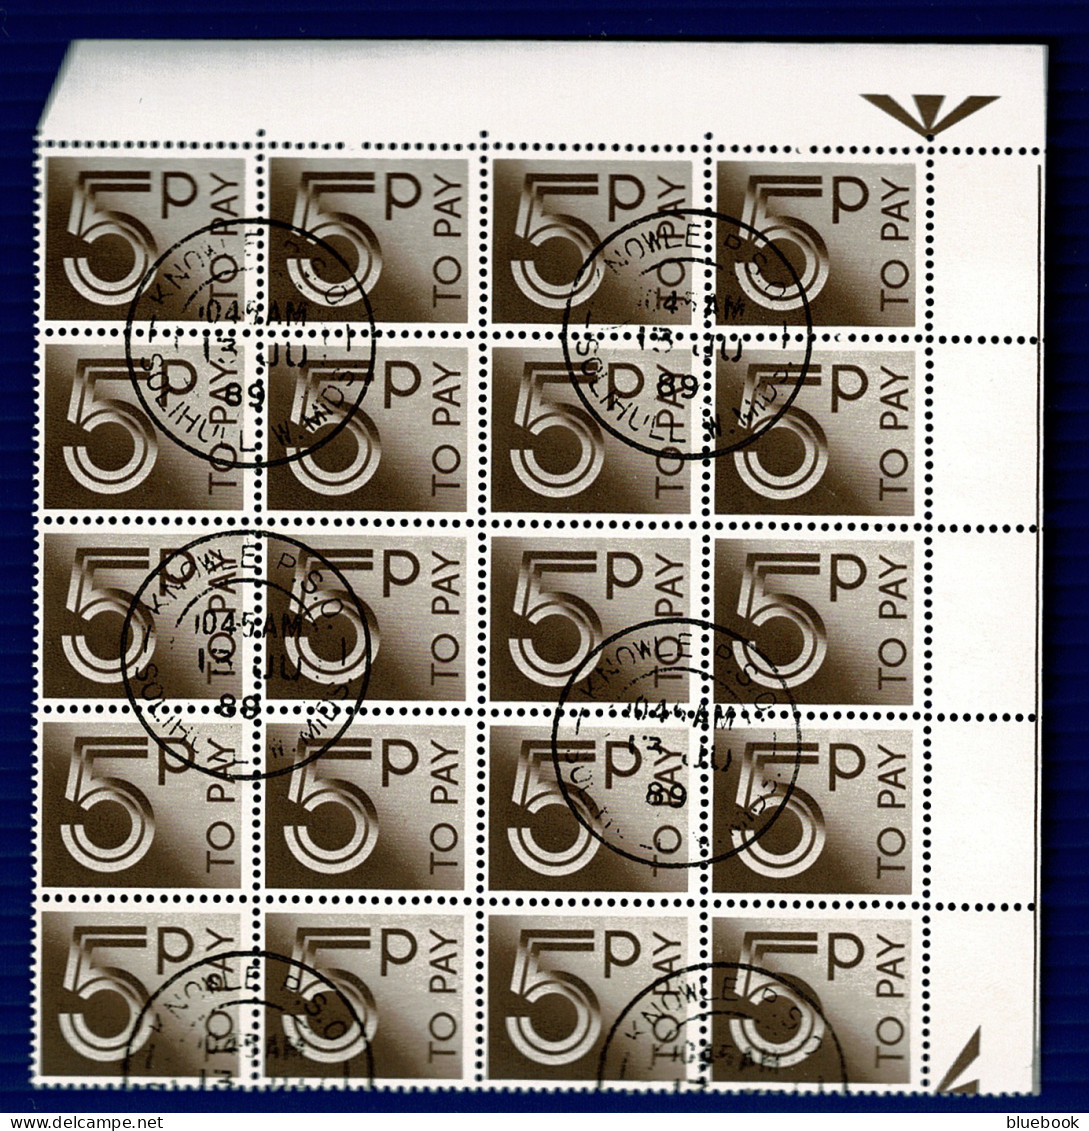 Ref 1608 -  GB 1982 - 5p Postage Due Stamps Scarce Corner Block Of 20 - Fine Used SG D94 - Taxe